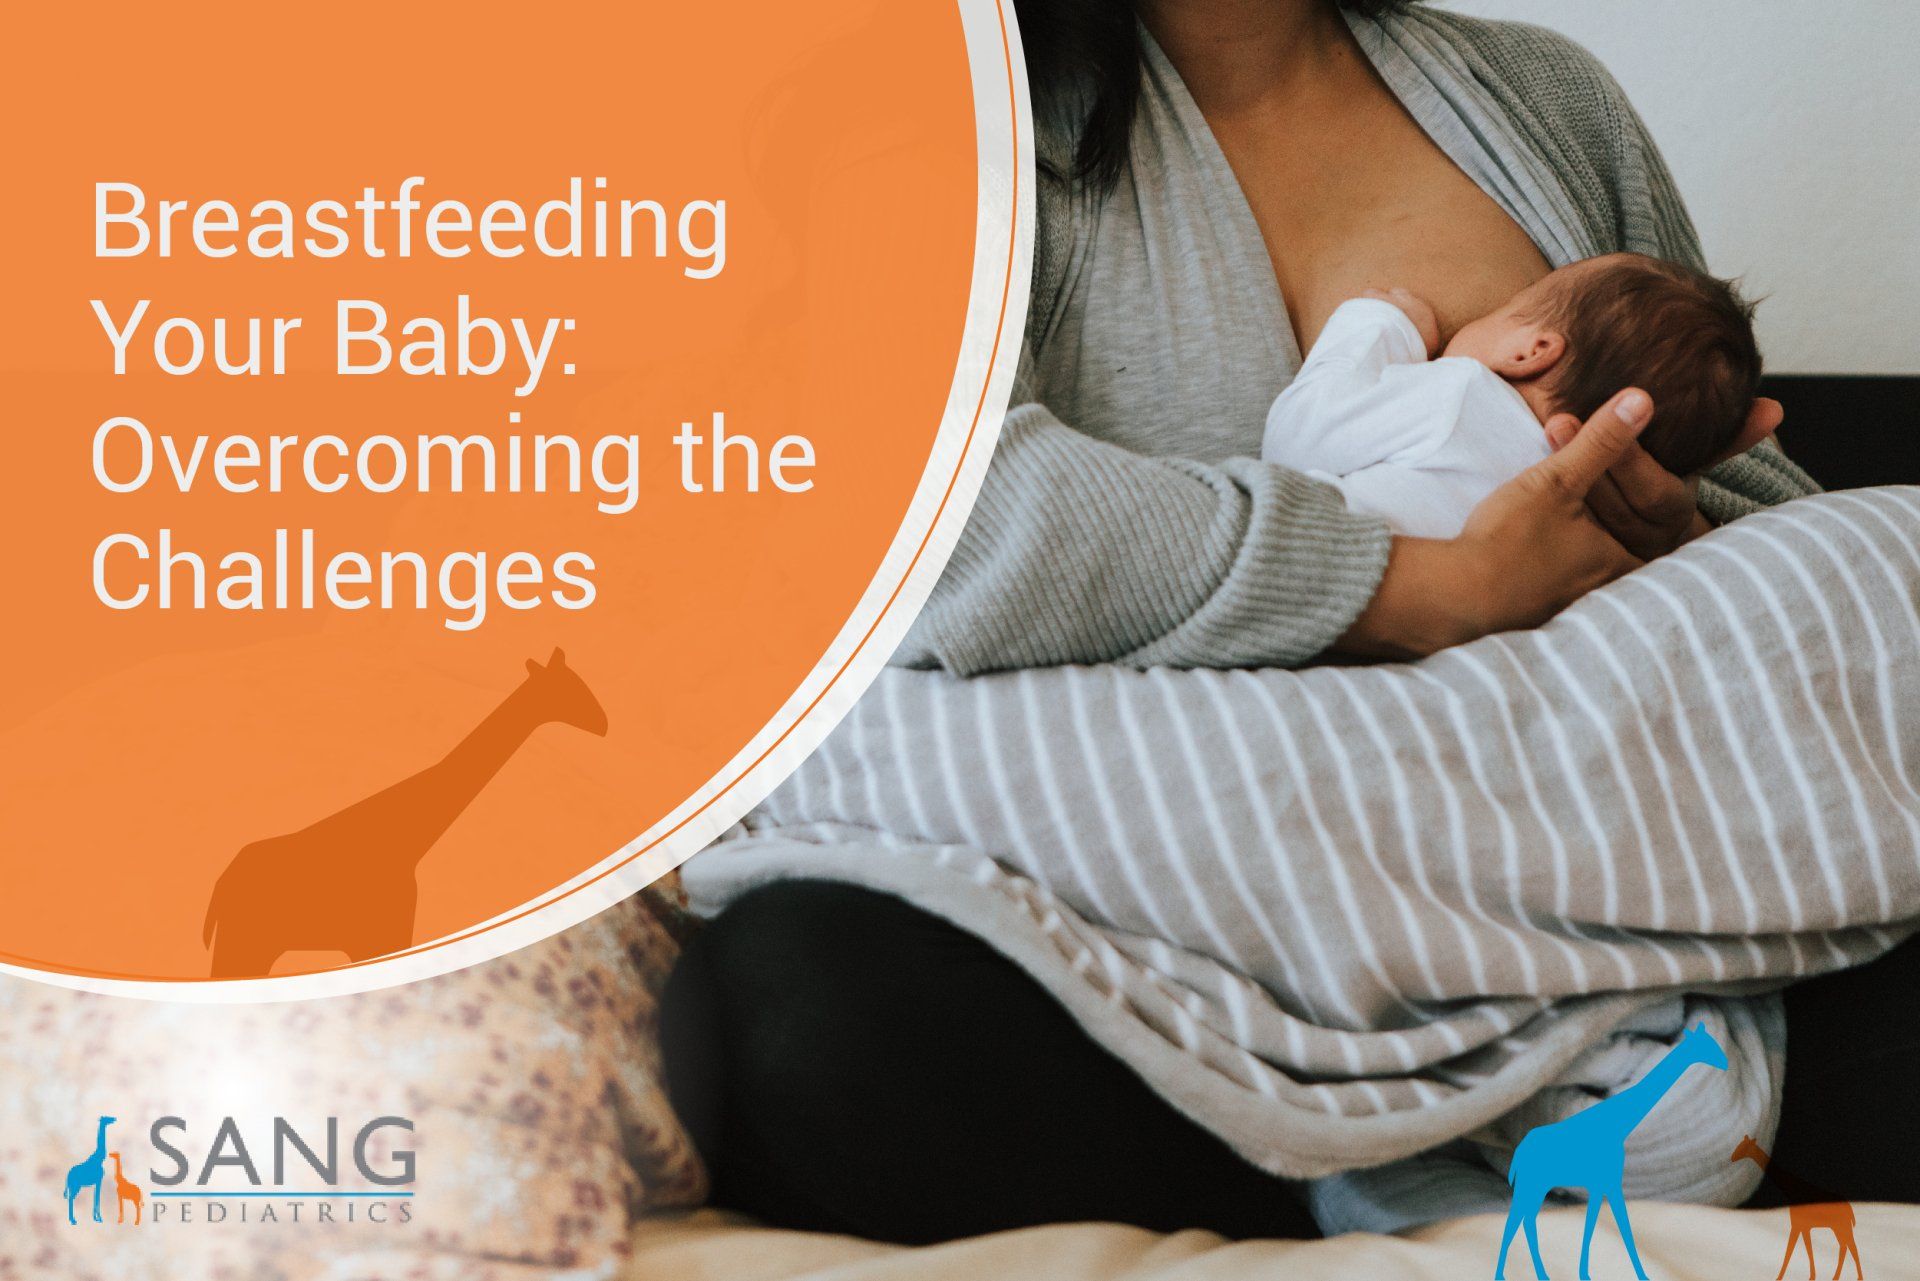 Breastfeeding Your Baby: Overcoming the Challenges